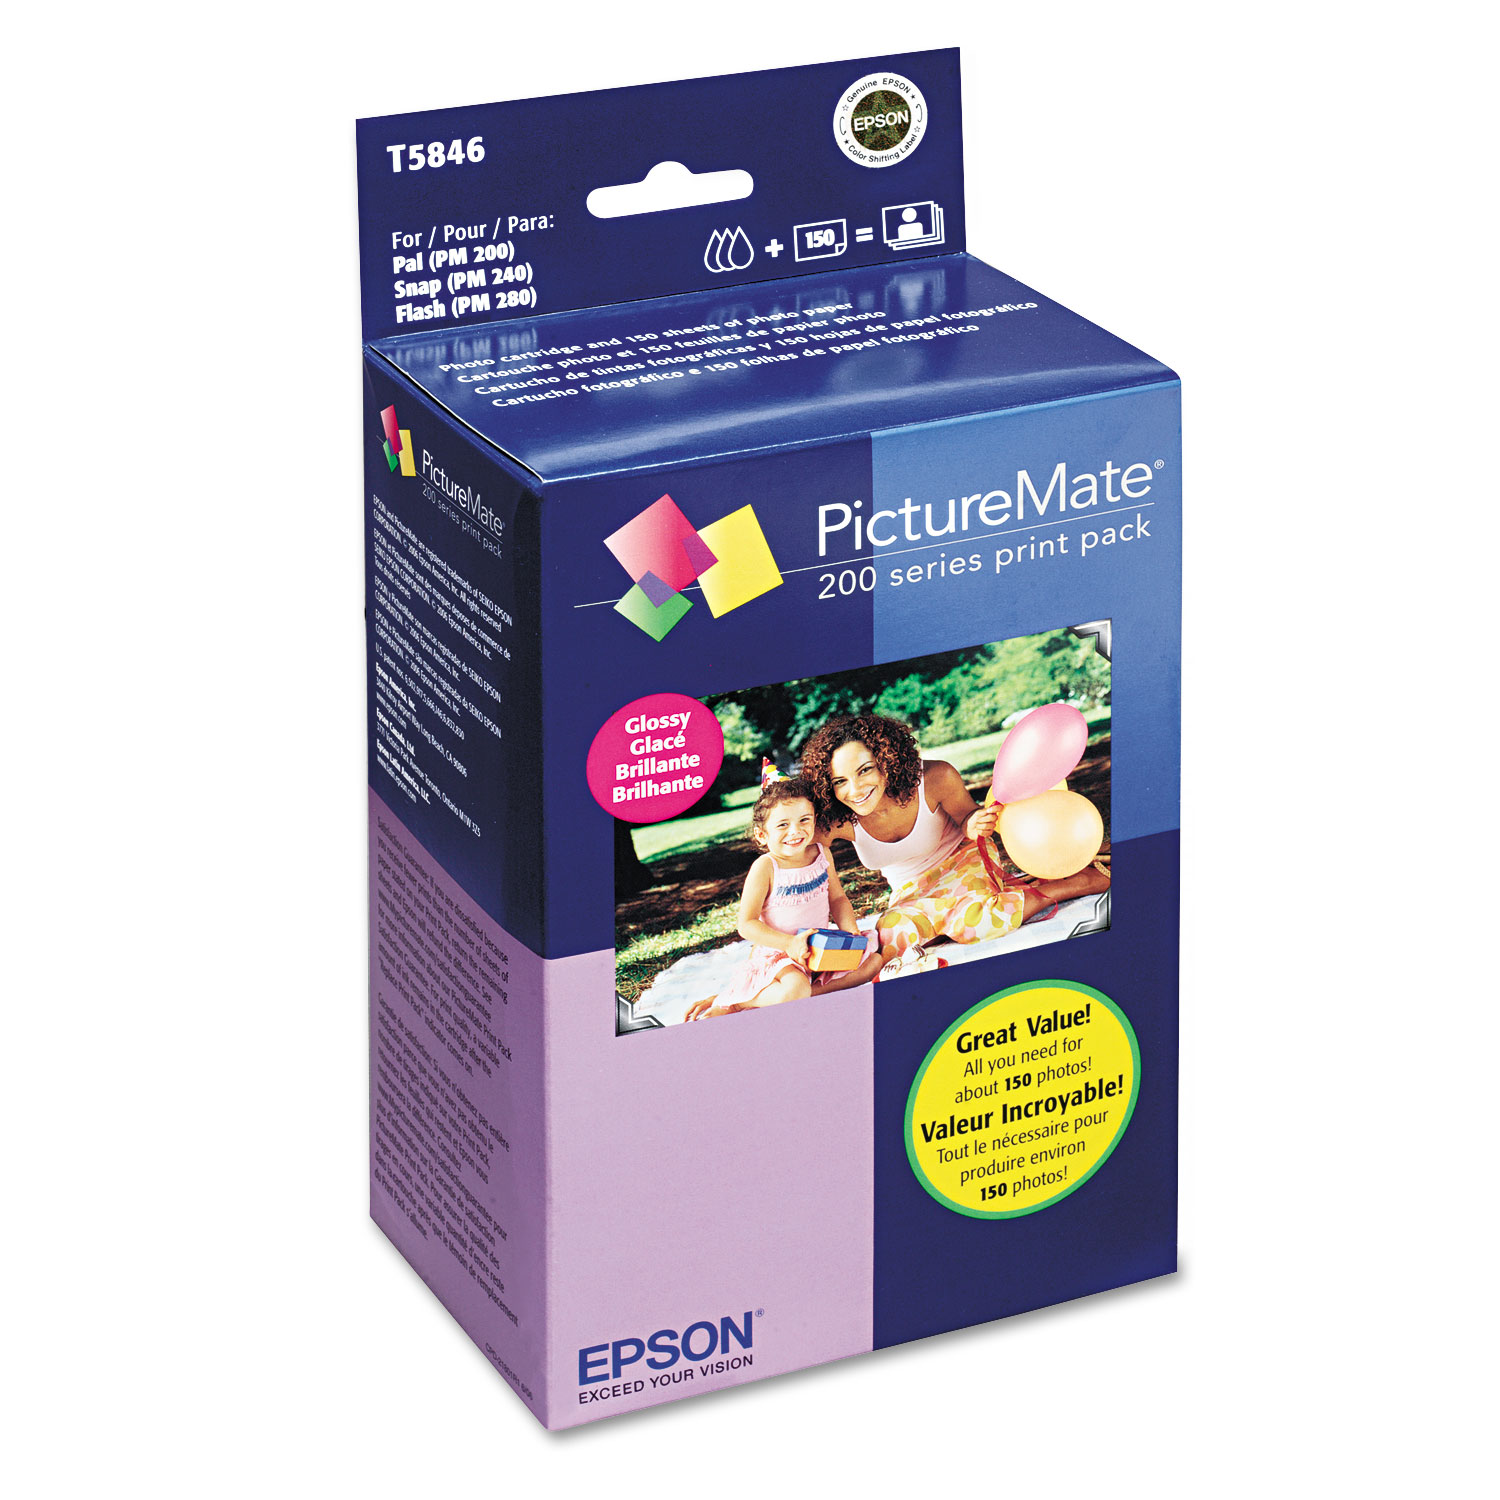 T5846 PictureMate 200 Print Pack, Black/Cyan/Magenta/Yellow Ink & Photo Paper